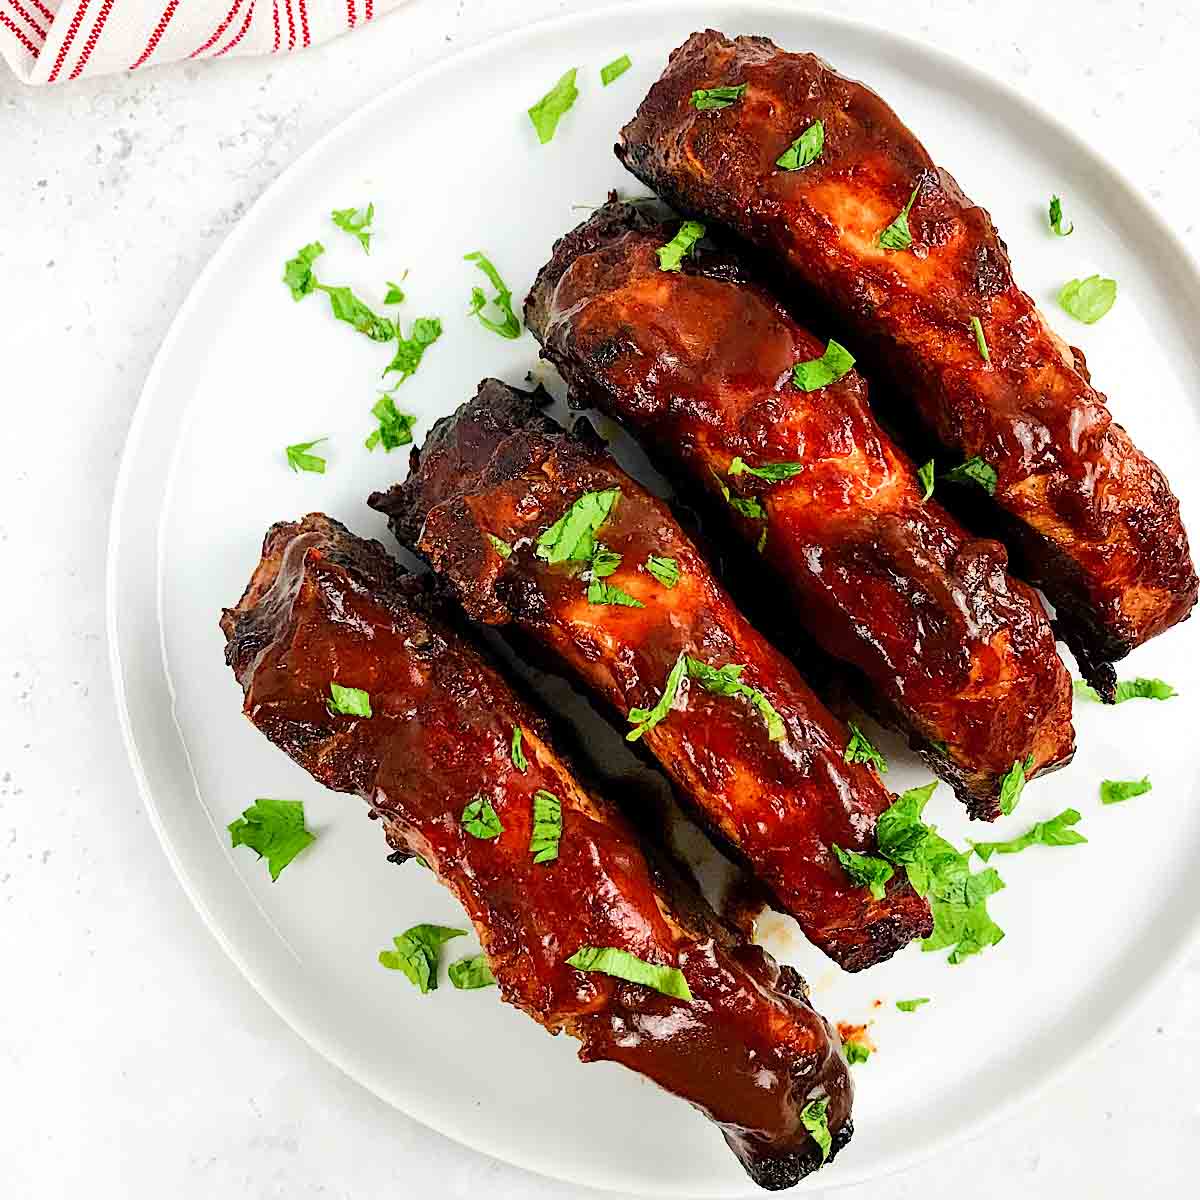 Air fryer country style ribs